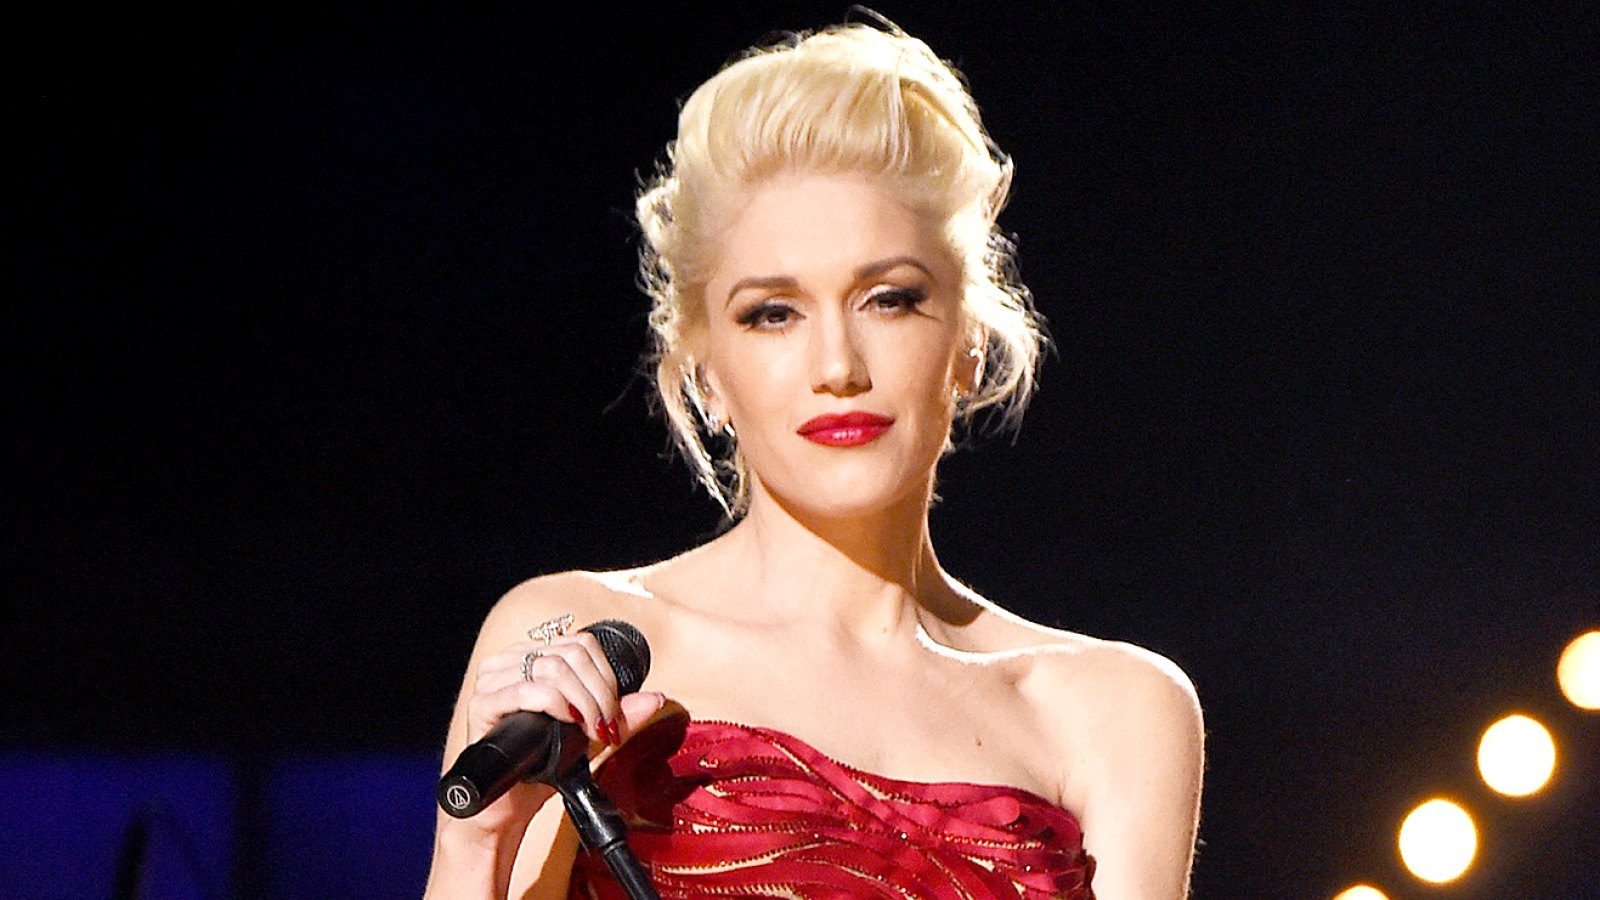 Gwen Stefani performs at The 57th Annual GRAMMY Awards.